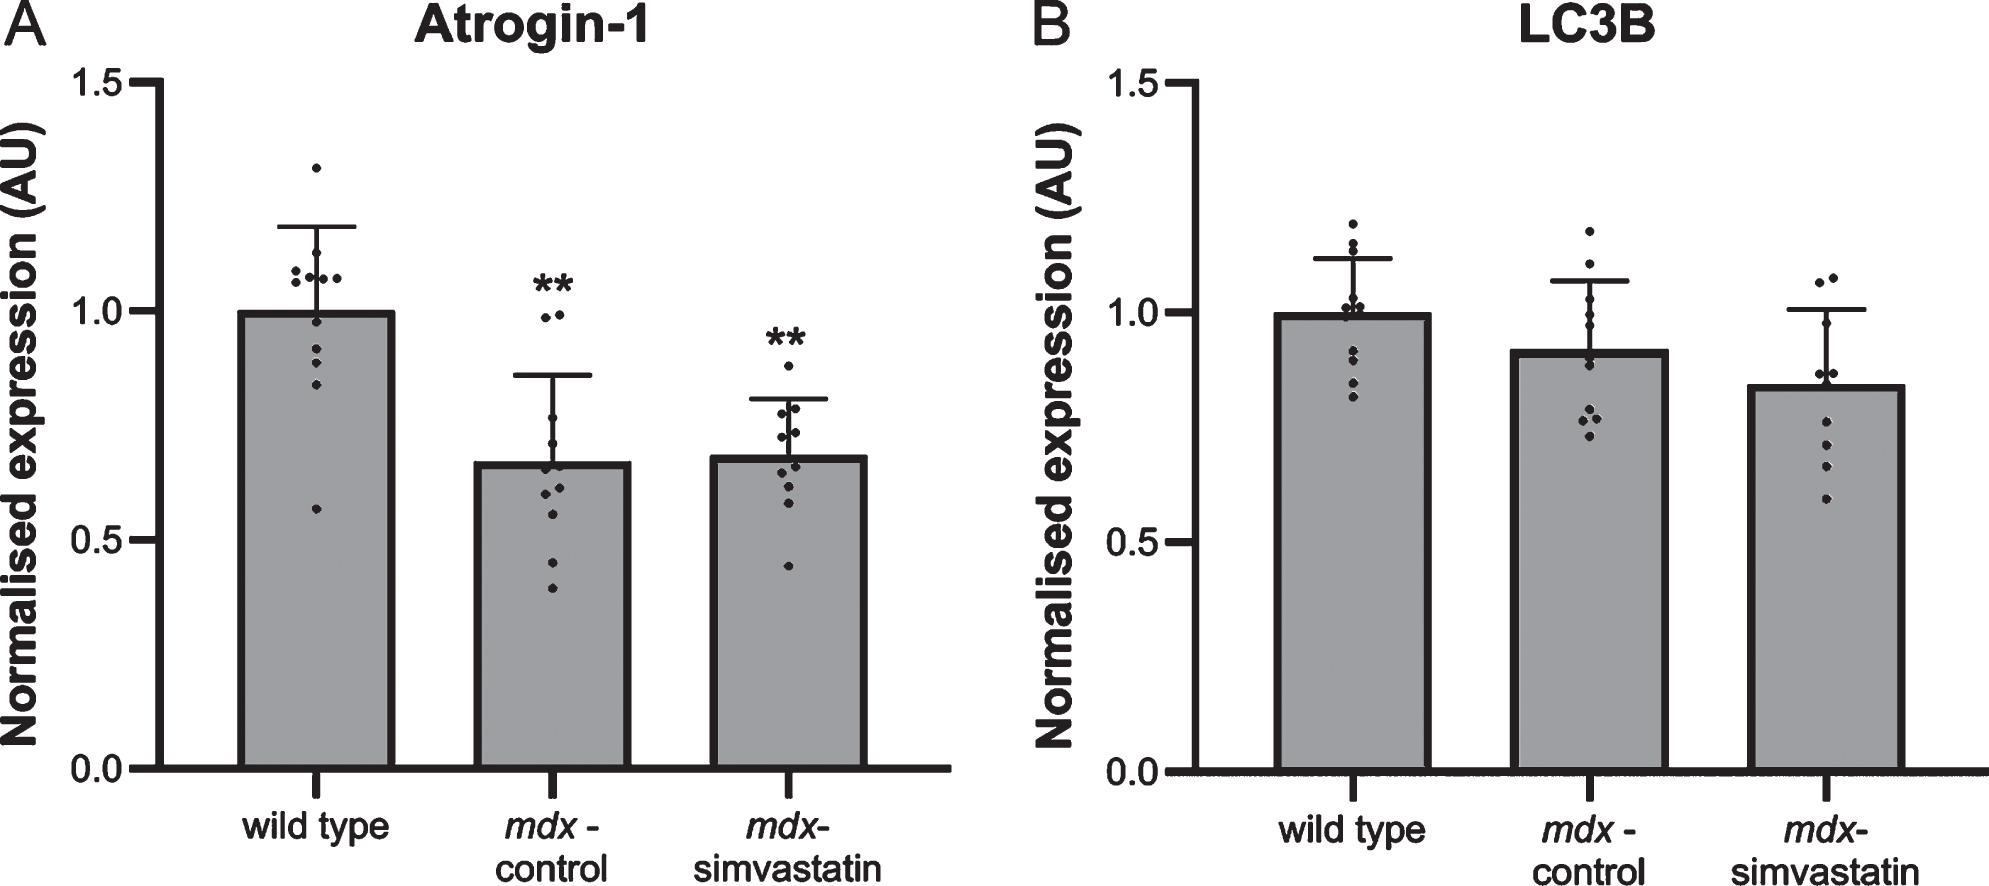 Autophagy. Expression of (A) atrogin–1 and (B) LC3B in the diaphragm of 24–week old mice after 12 weeks of simvastatin treatment (n = 10–12). **p < 0.01 compared to wild type mice.